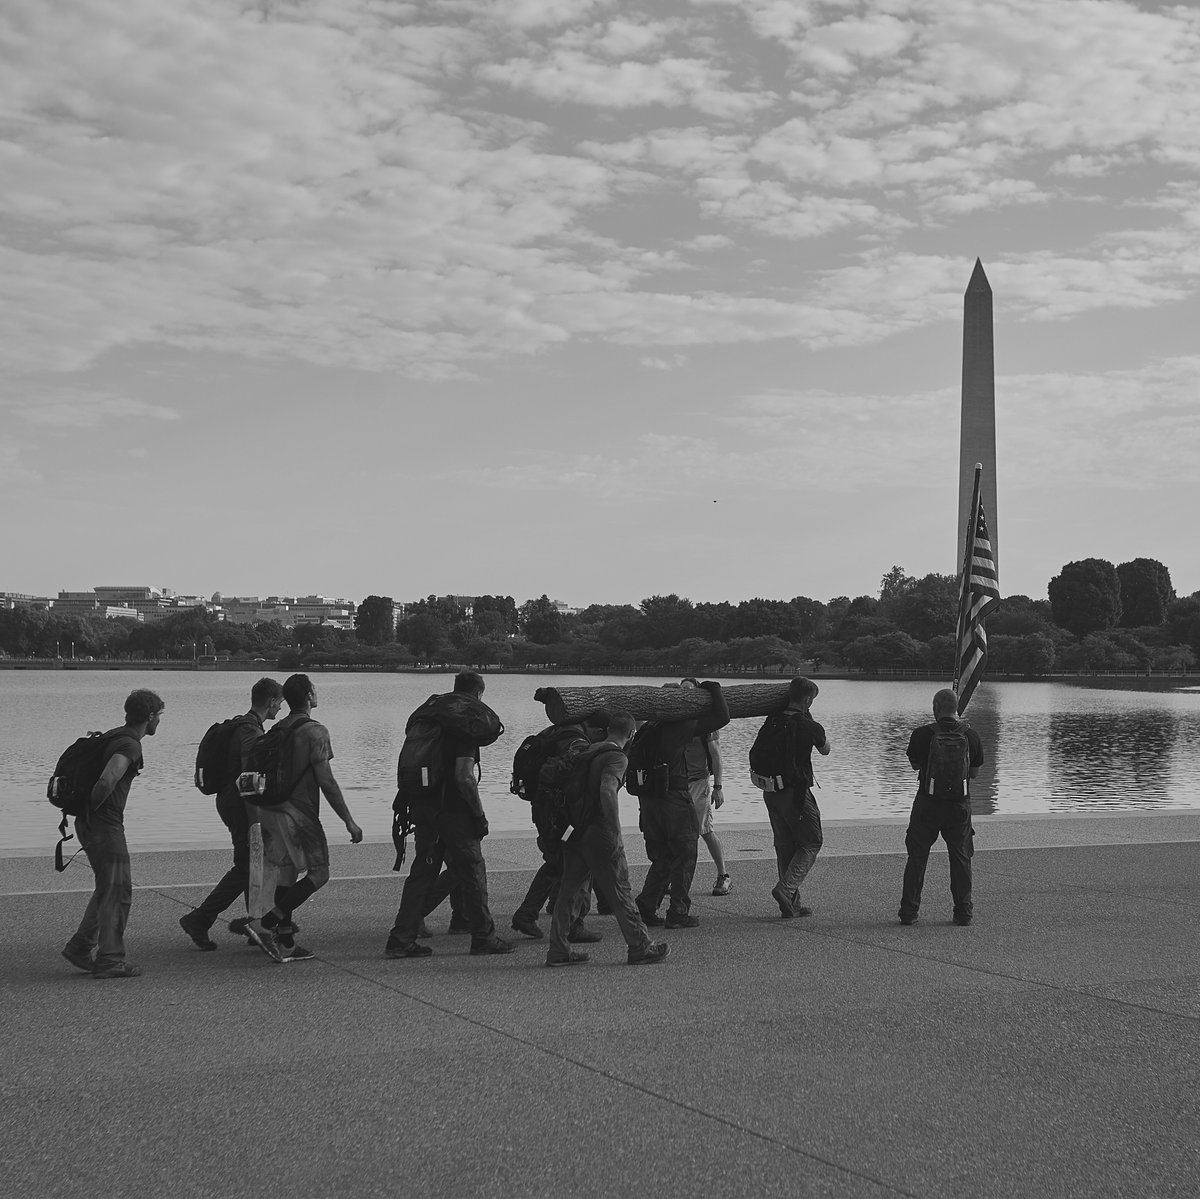 On Presidents' Day, we honor the birth of a historic American leader, George Washington as well as all those who have stepped up and took on the role of leading and serving for our country. Happy Presidents' Day! #GORUCK #PresidentsDay